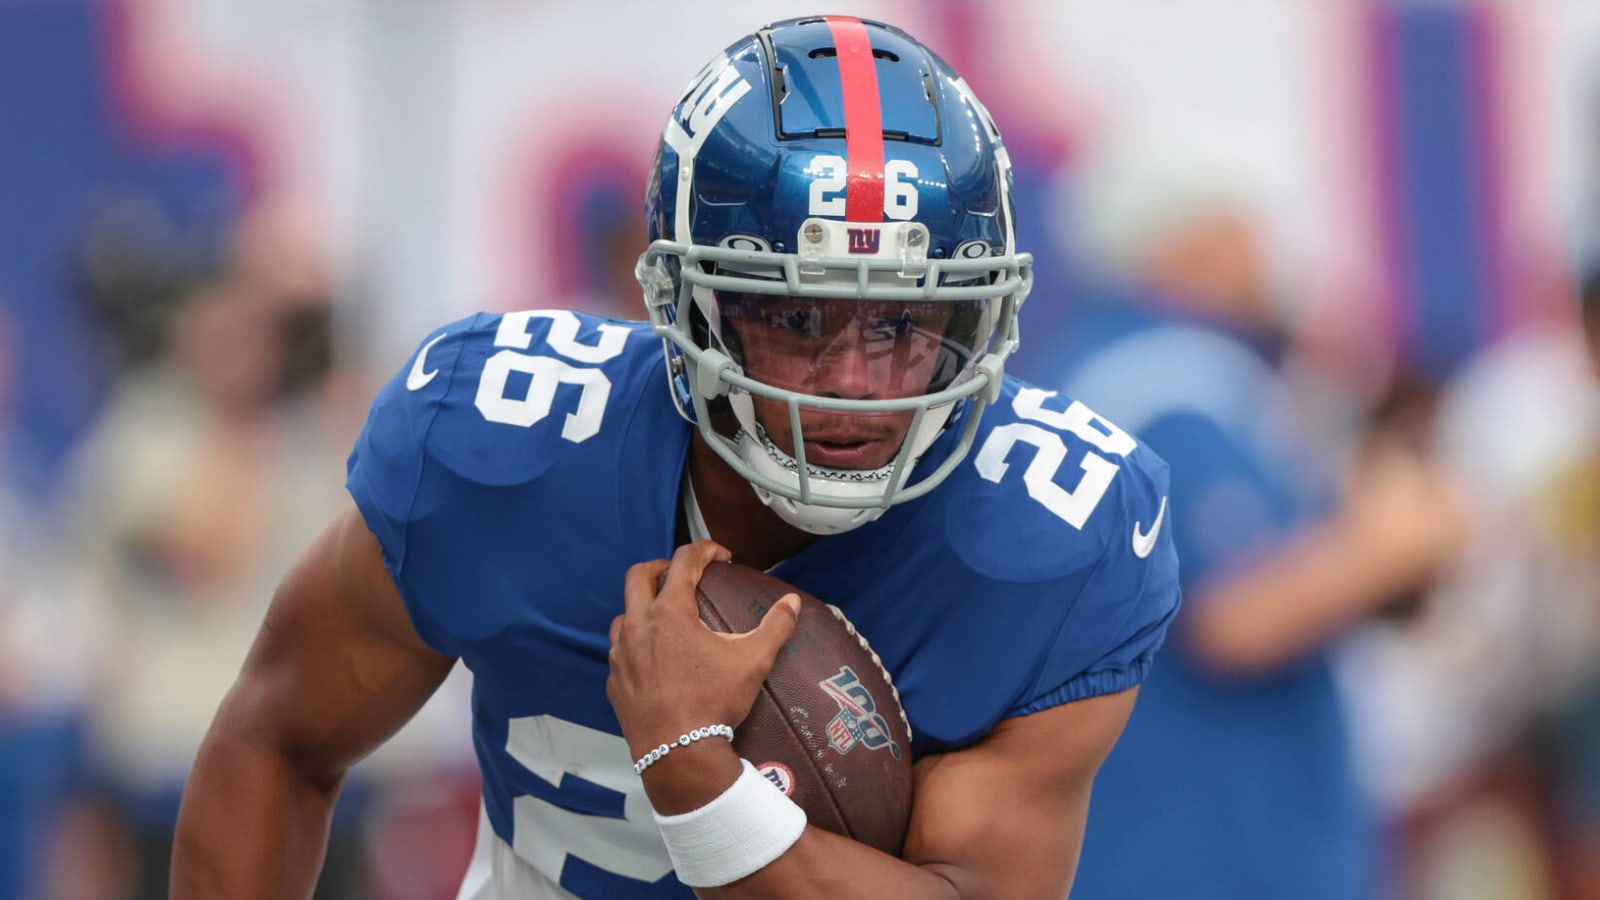 Giants RB Saquon Barkley looking to 'shut everyone up' in 2022